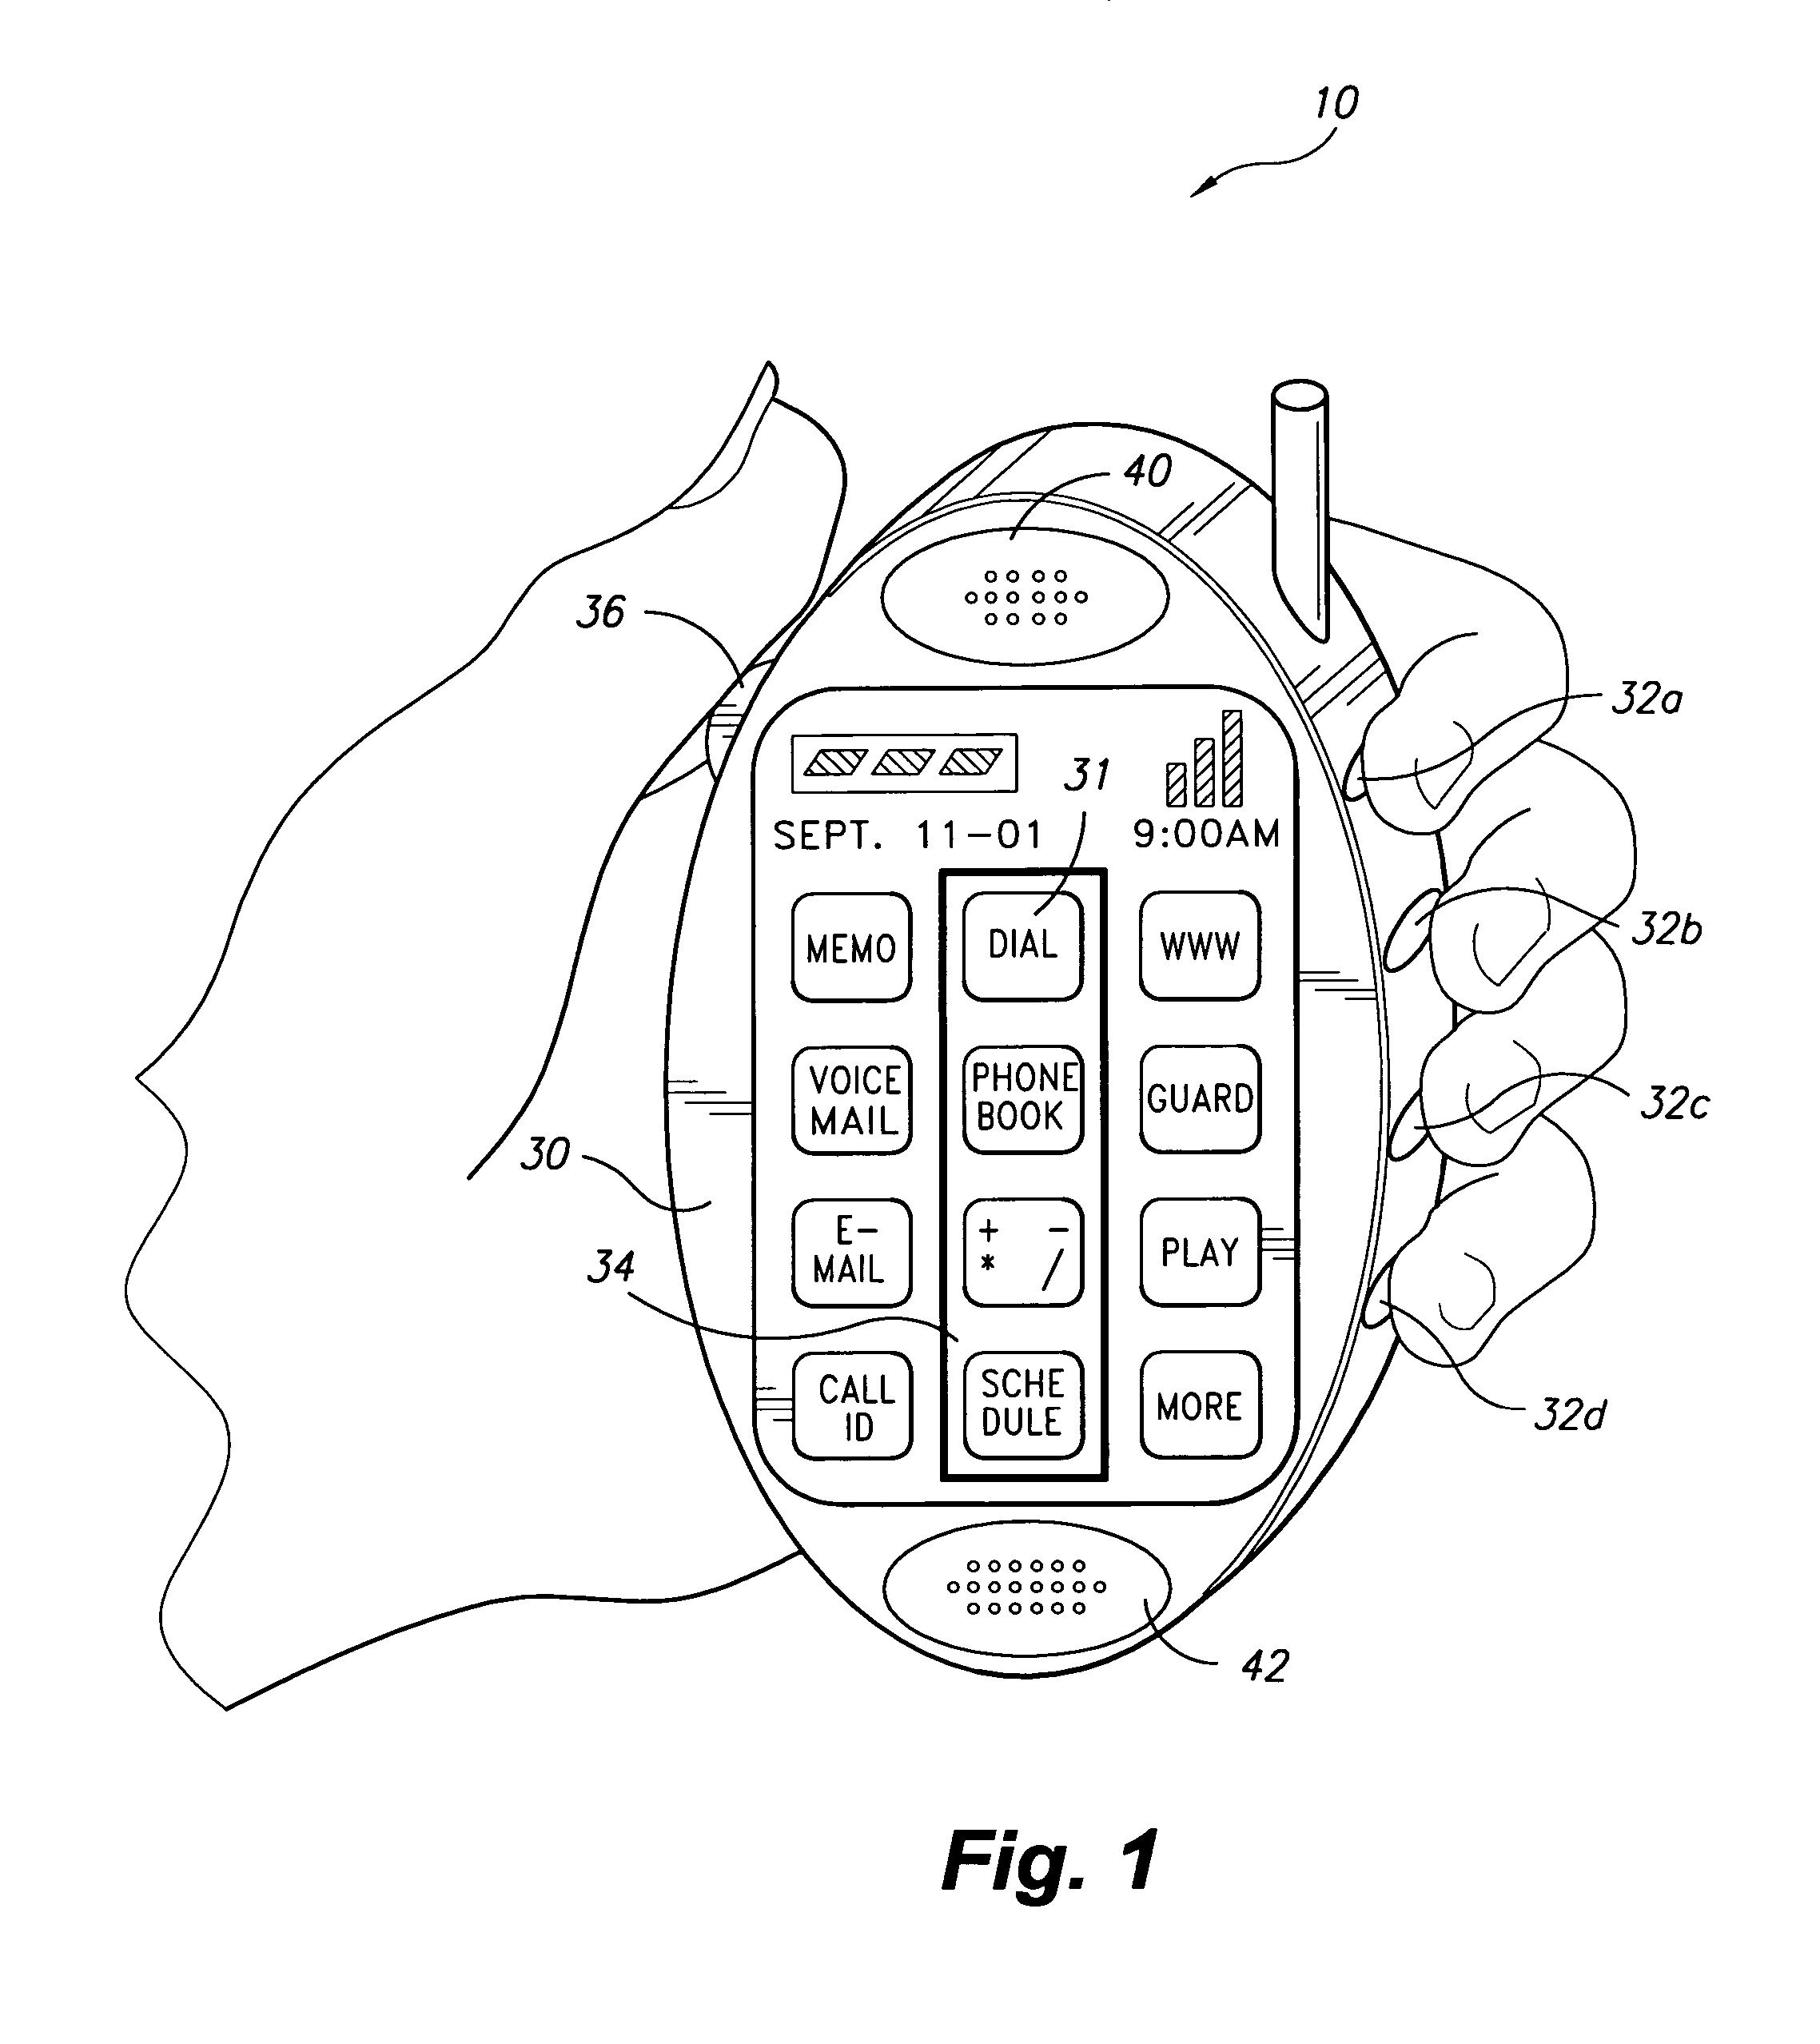 Active keyboard system for handheld electronic devices